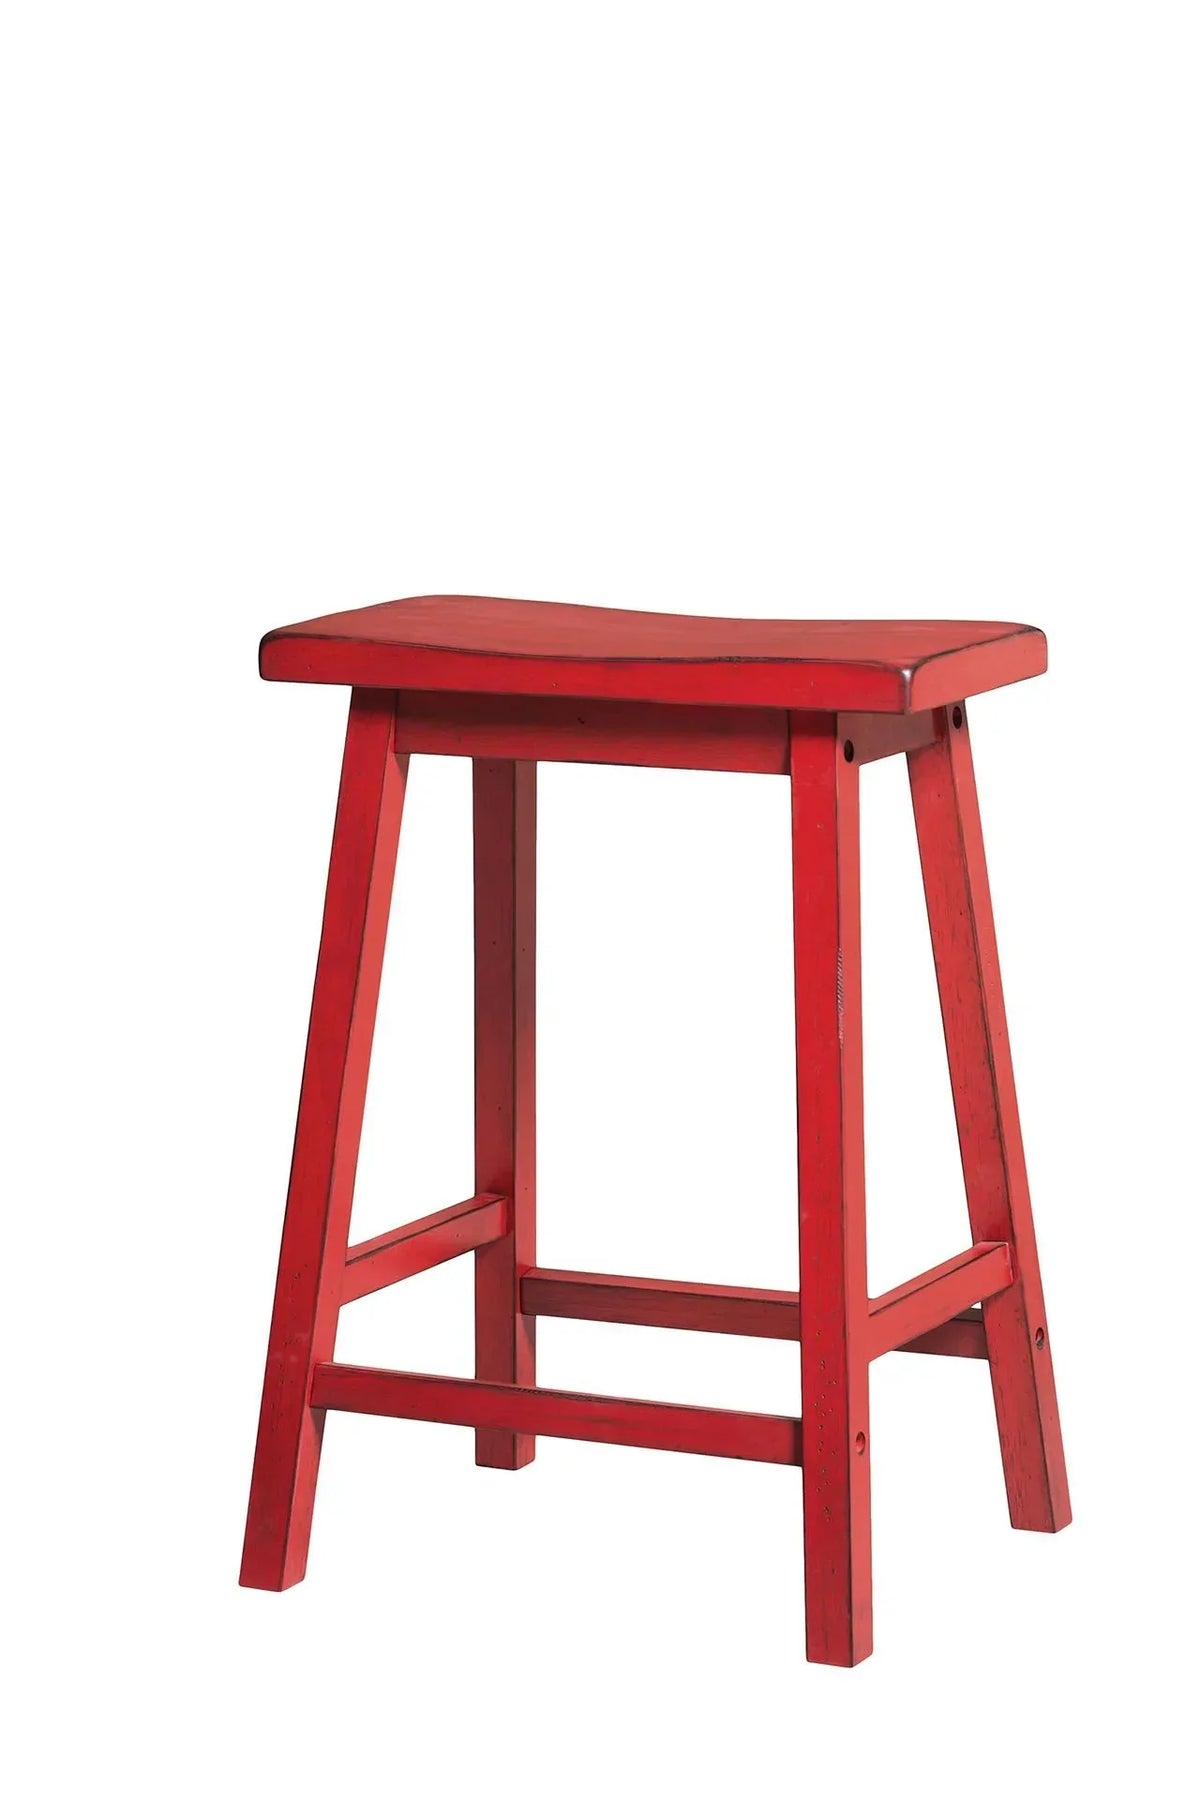 Gaucho Antique Red Stool Model 96649 By ACME Furniture